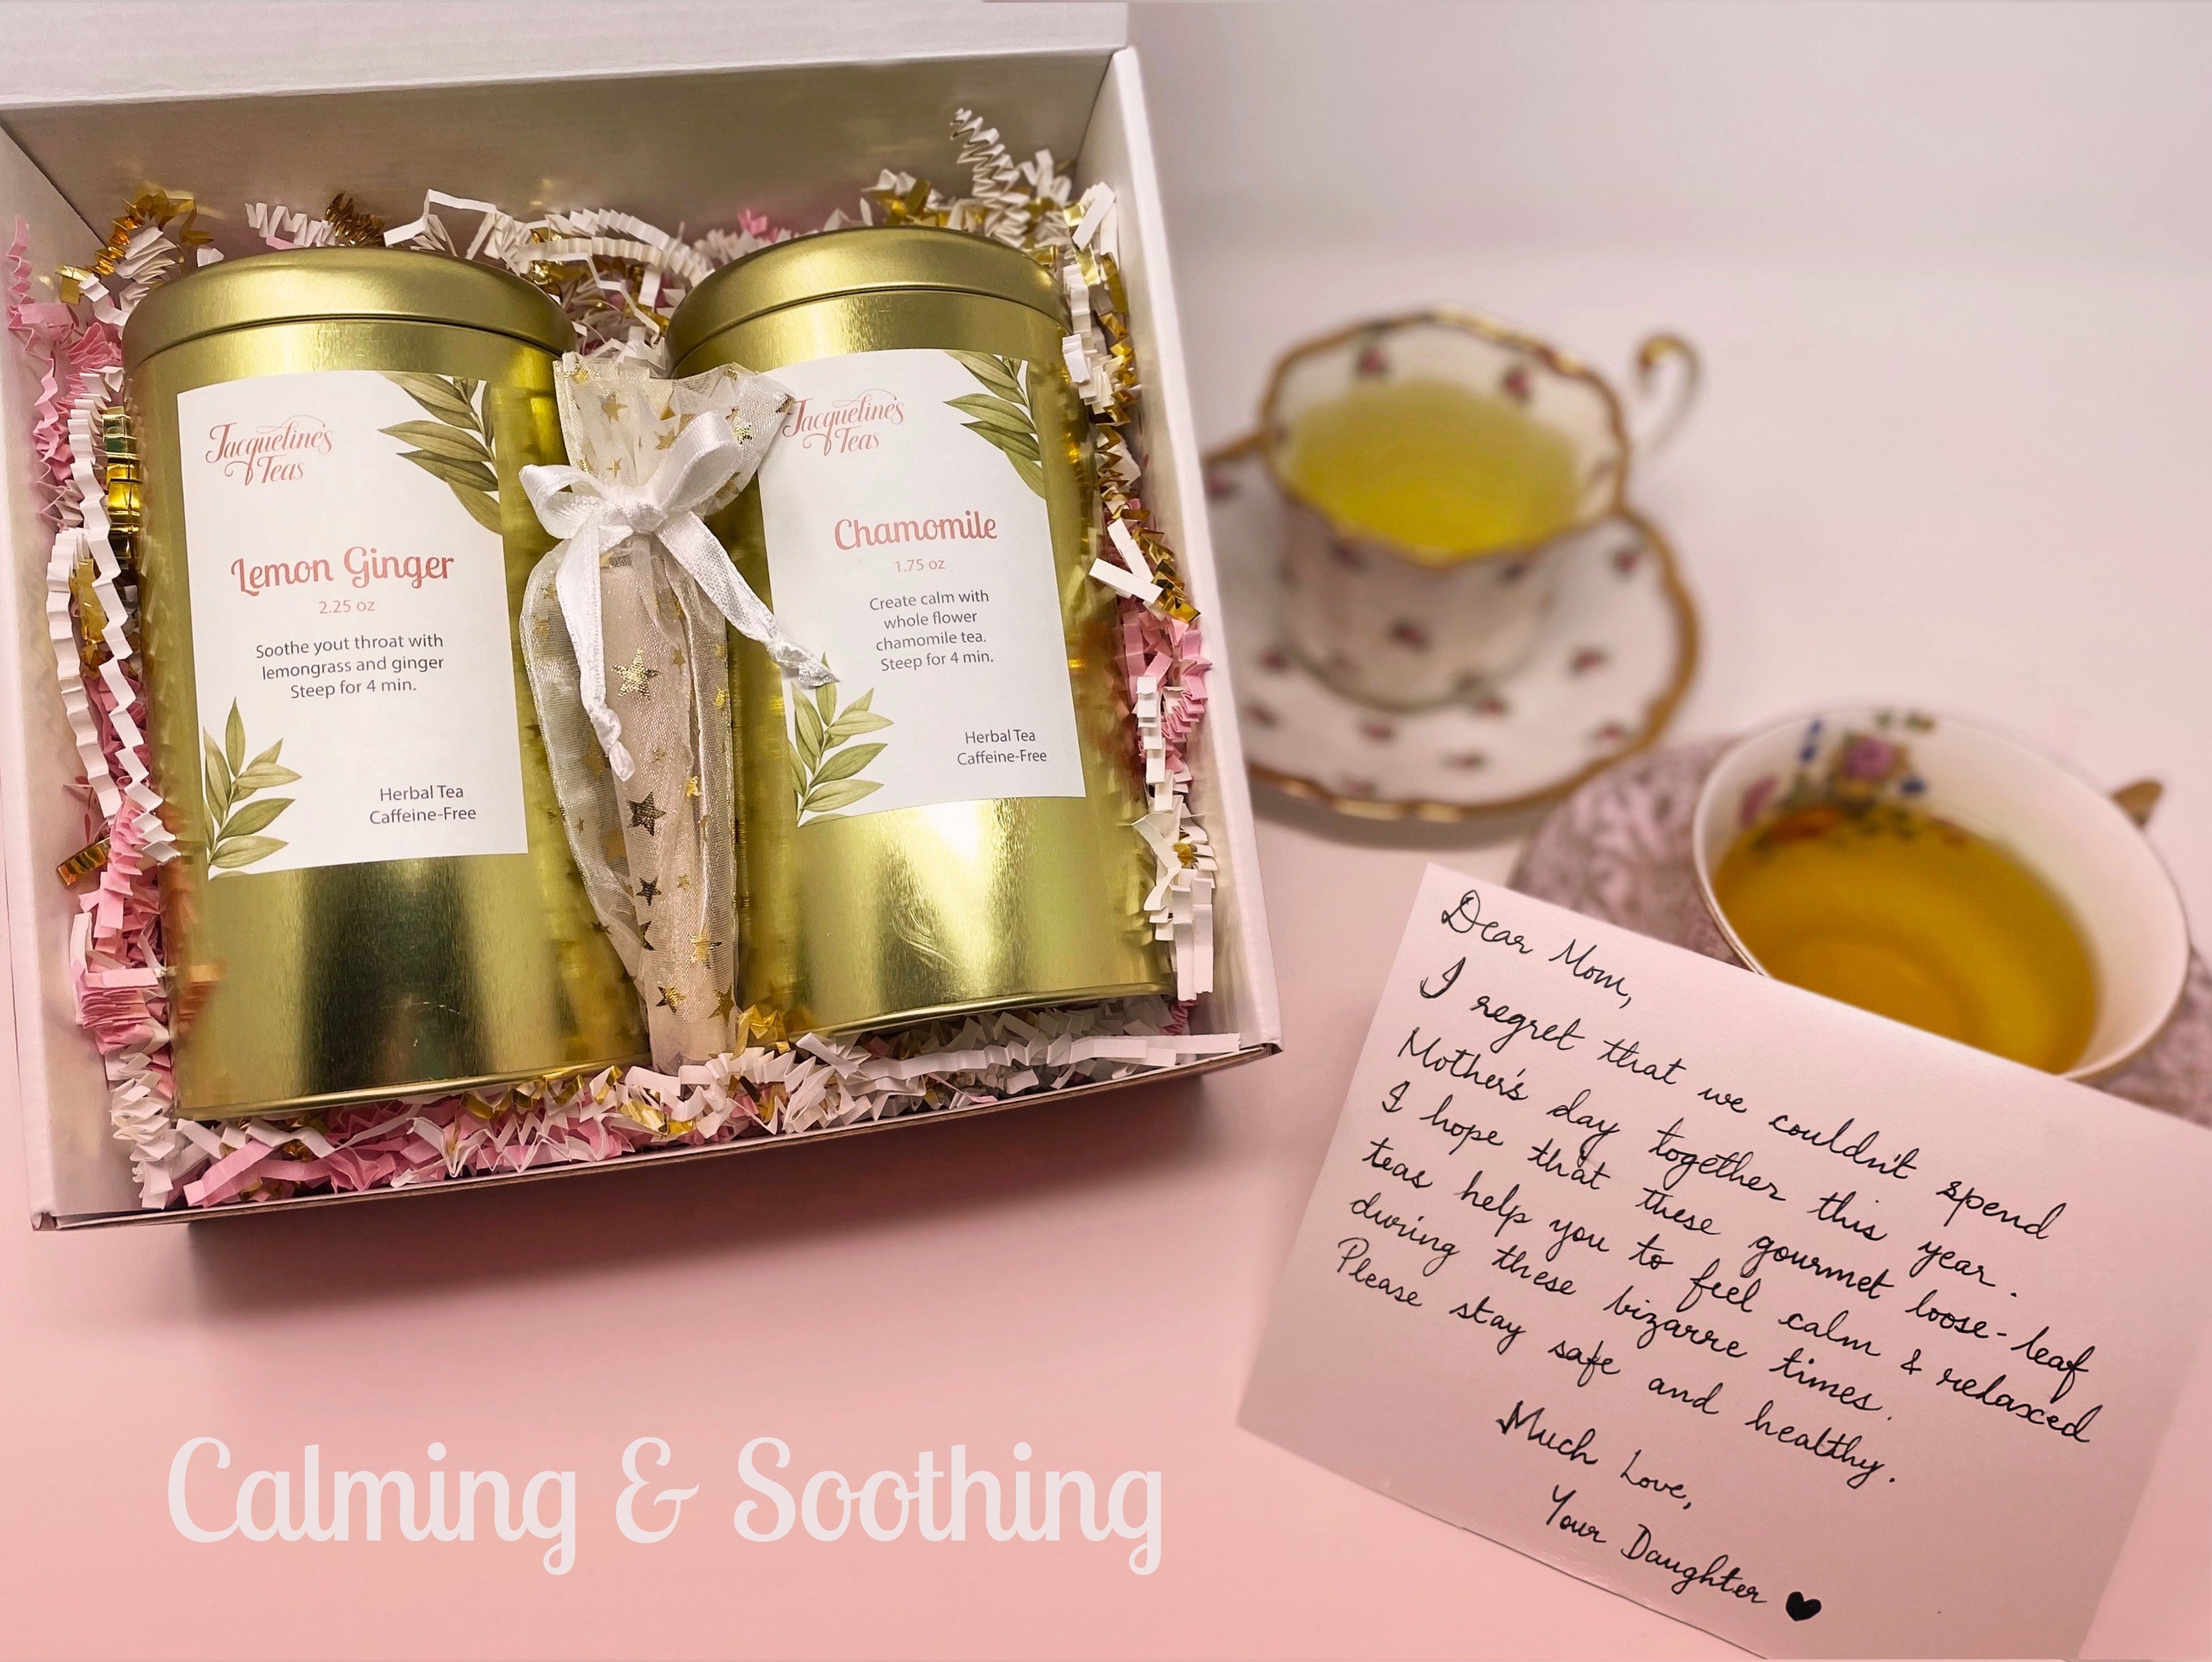 Calming and Soothing tea image depicts Lemon Ginger and Chamomile Tea in their box within their gift box along with tea filters and a custom note. The two teacups show what the teas look like once brewed. 